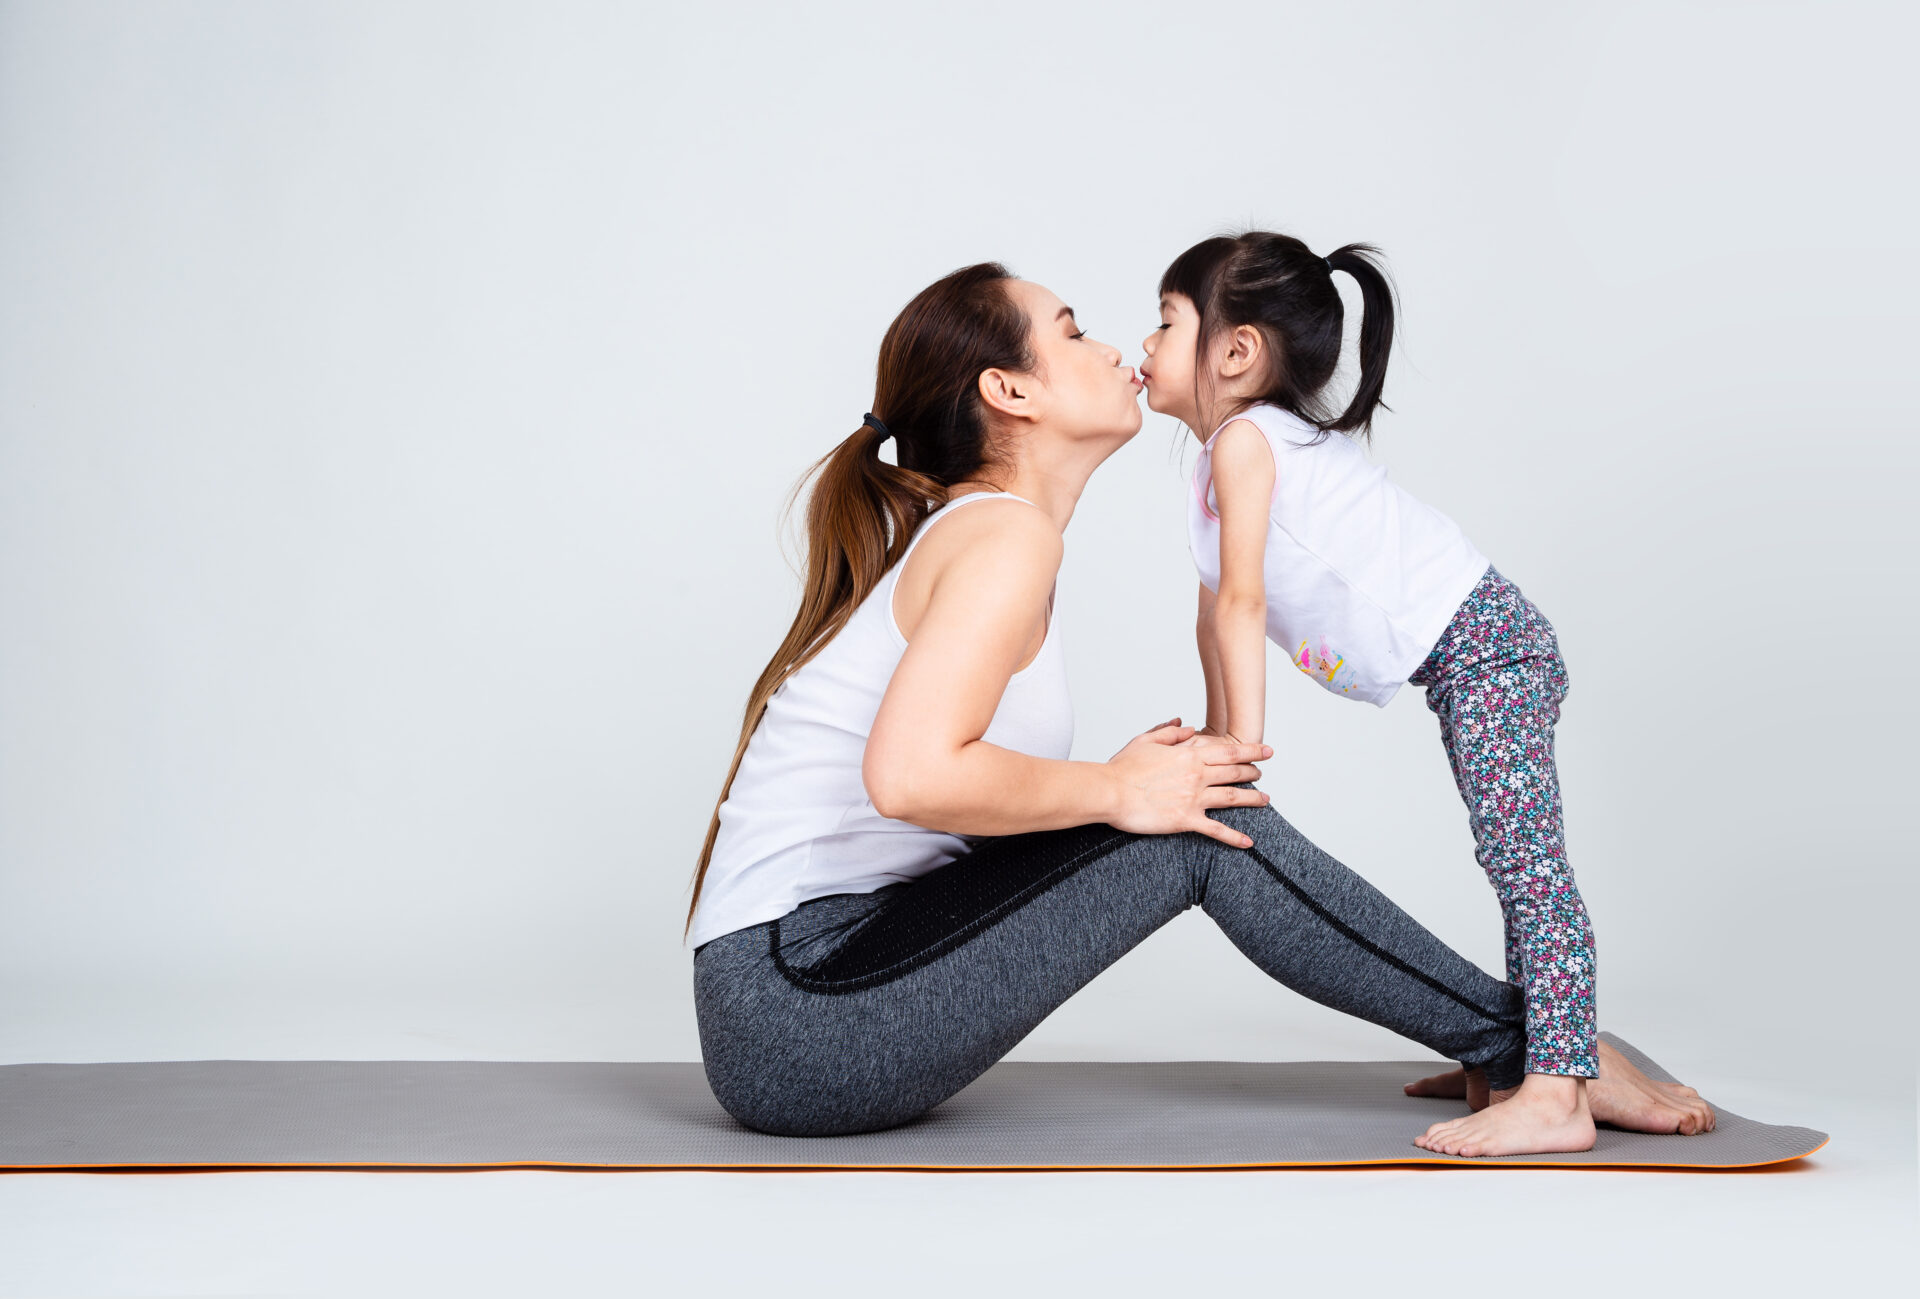 Exercises for busy mums